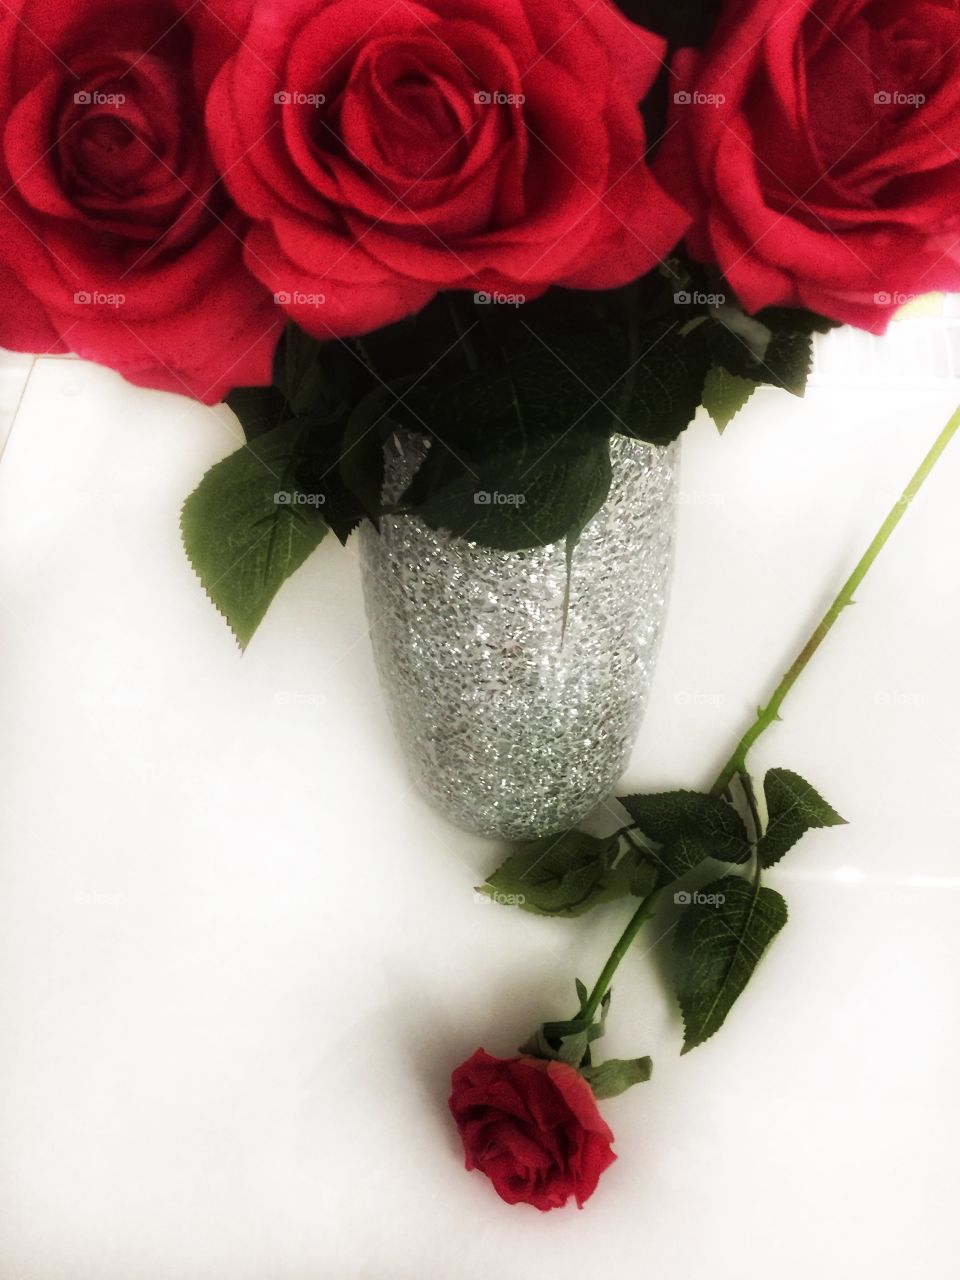 Silver studded case of red roses with one on white foreground 